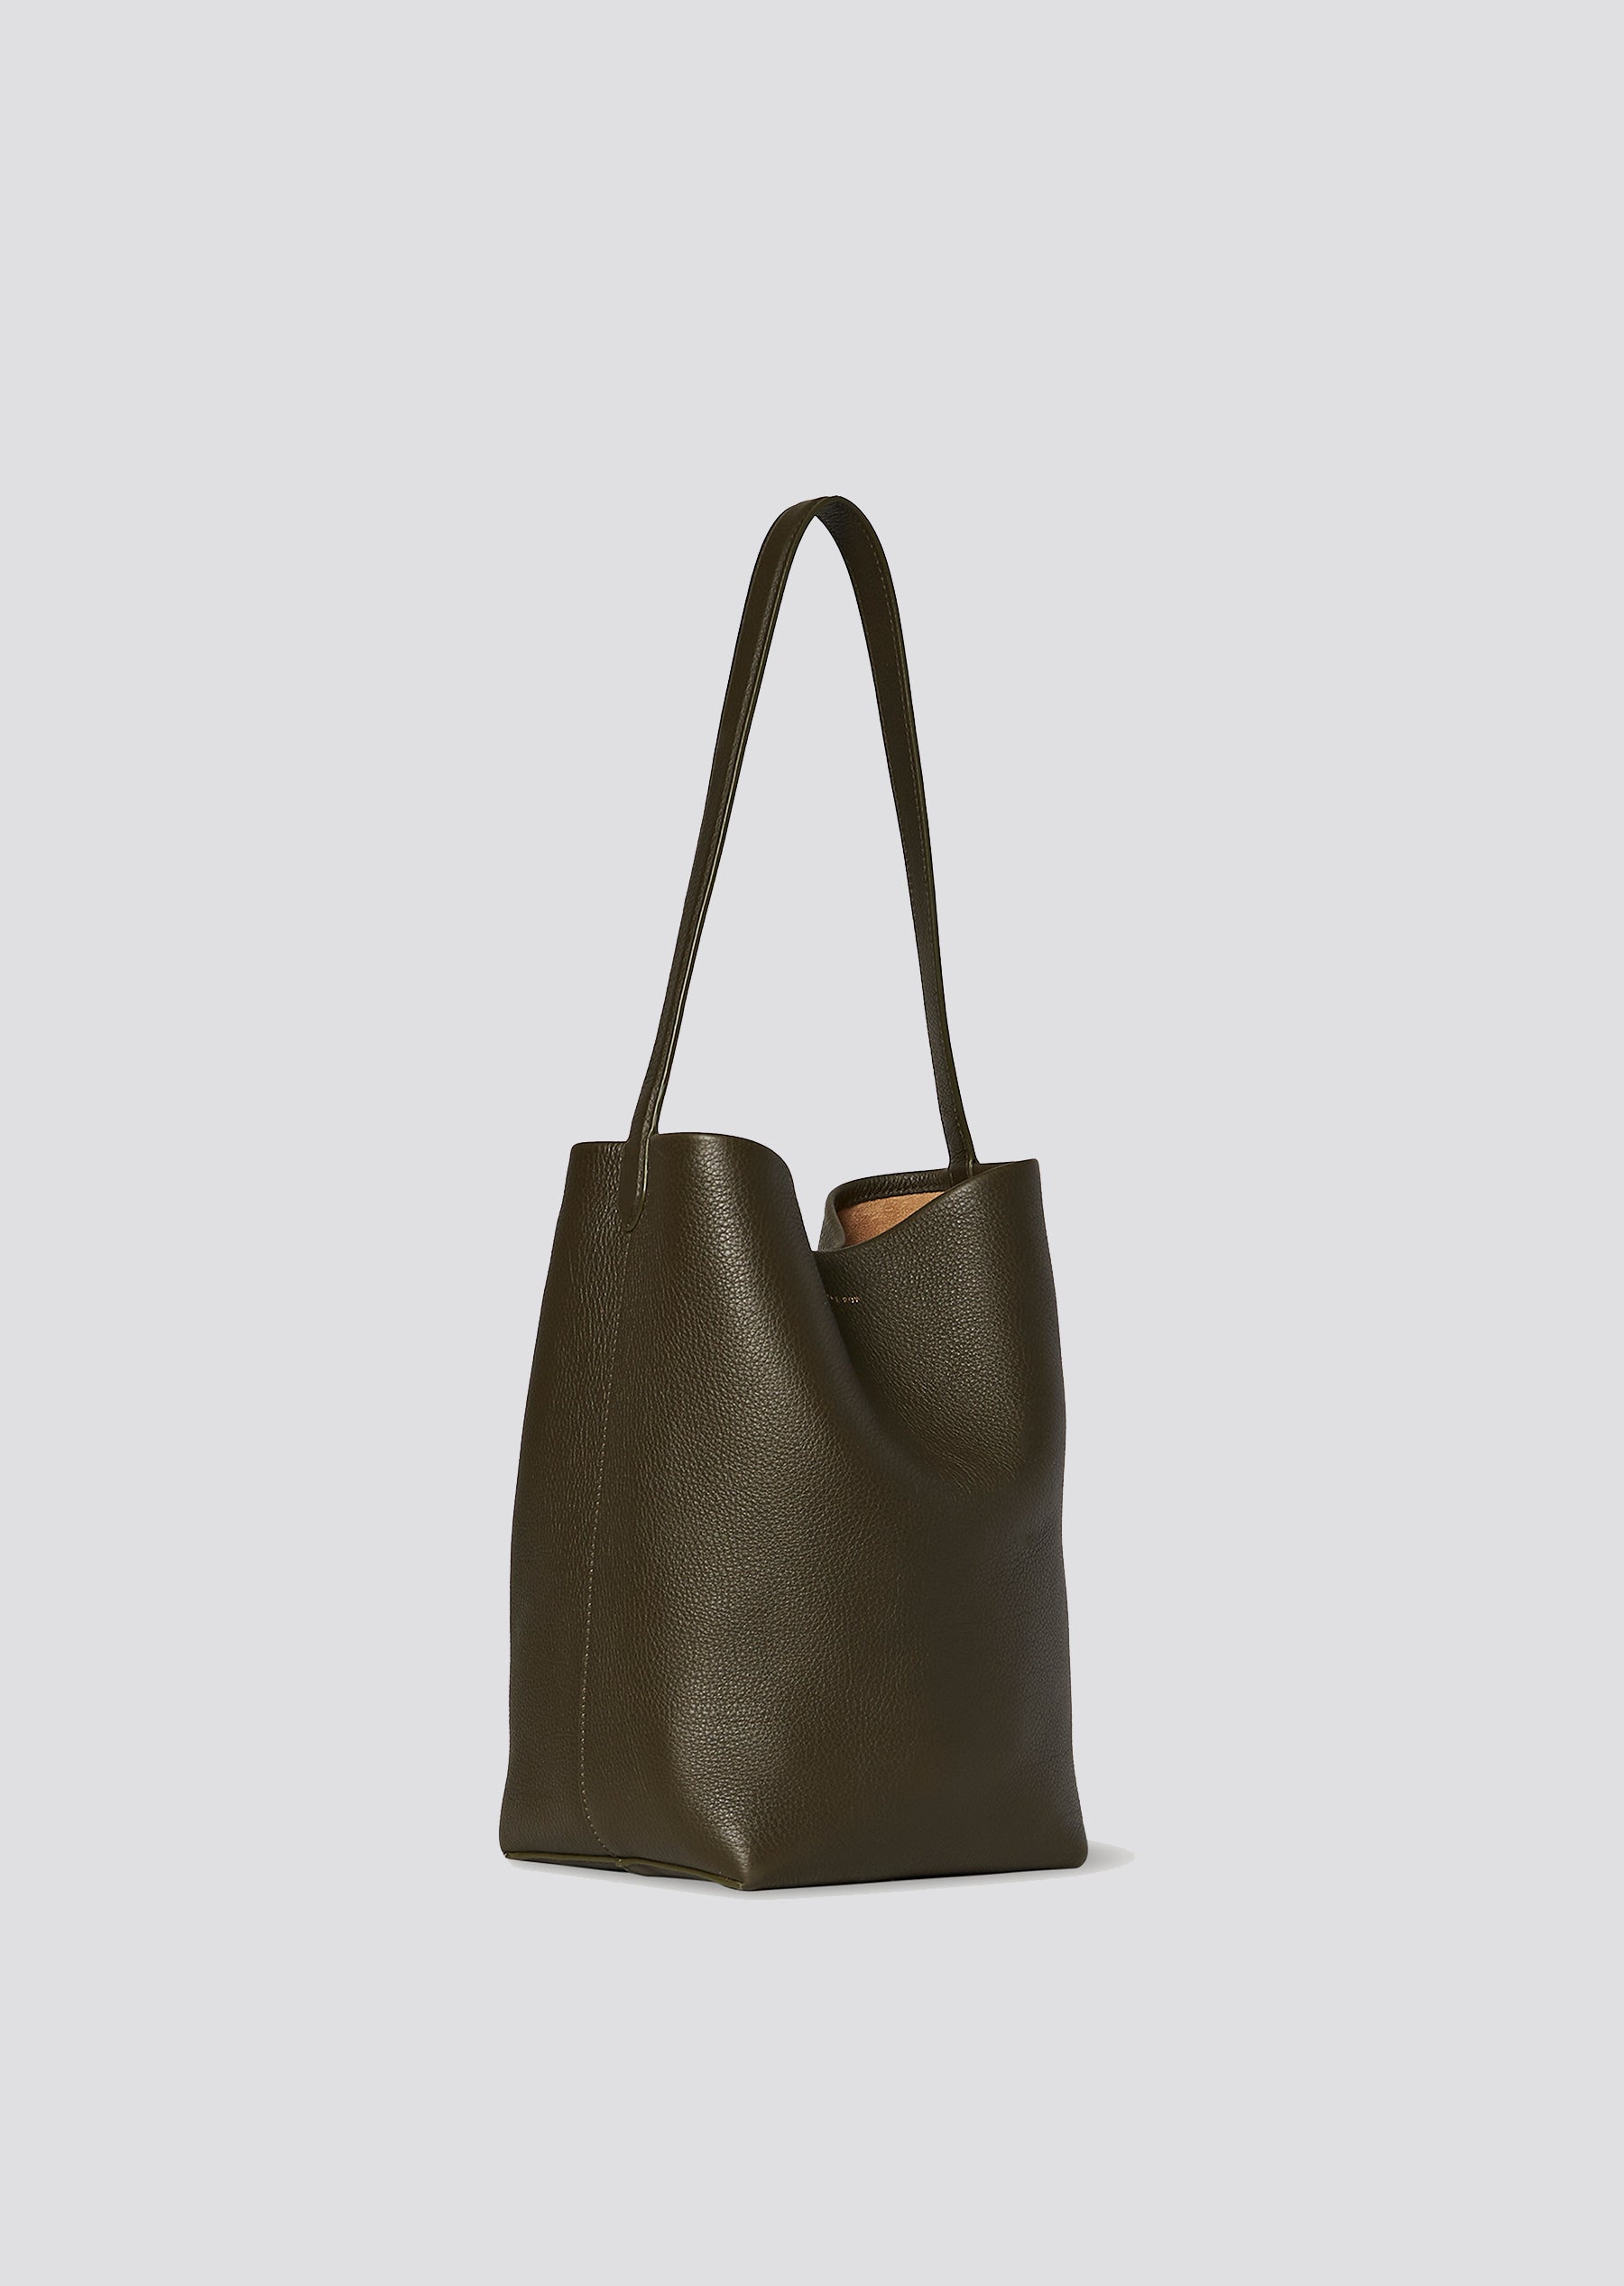 REVIEW - The Row large leather N/S Park tote bag review. Size